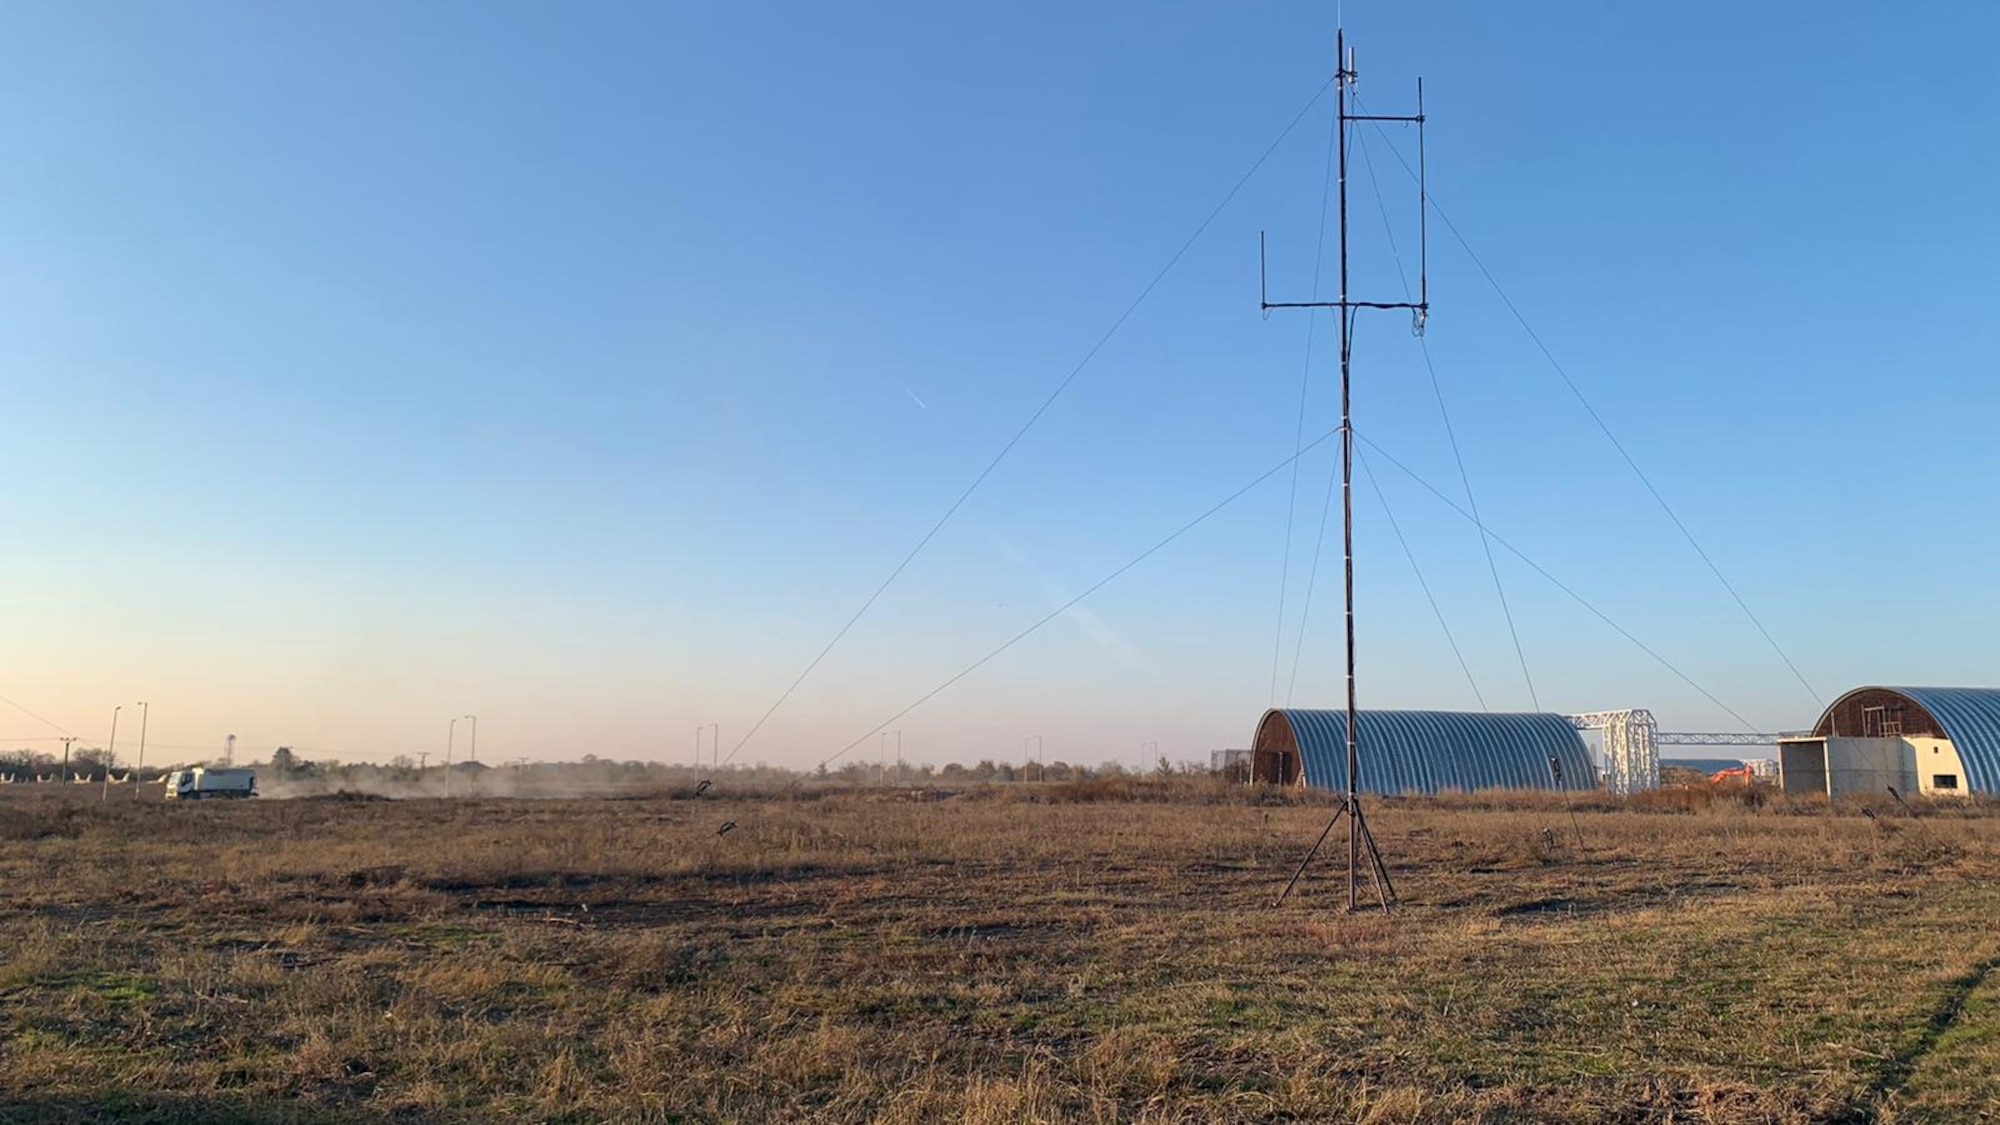 A BlueSky Mast is assembled during Castle Forge in Romania, Oct. 27, 2021. The 606th Air Control Squadron and 4th Expeditionary Air Support Operations Squadron used the BlueSky Mast to communicate with aircraft that participated in Castle Forge. (Courtesy Photo)